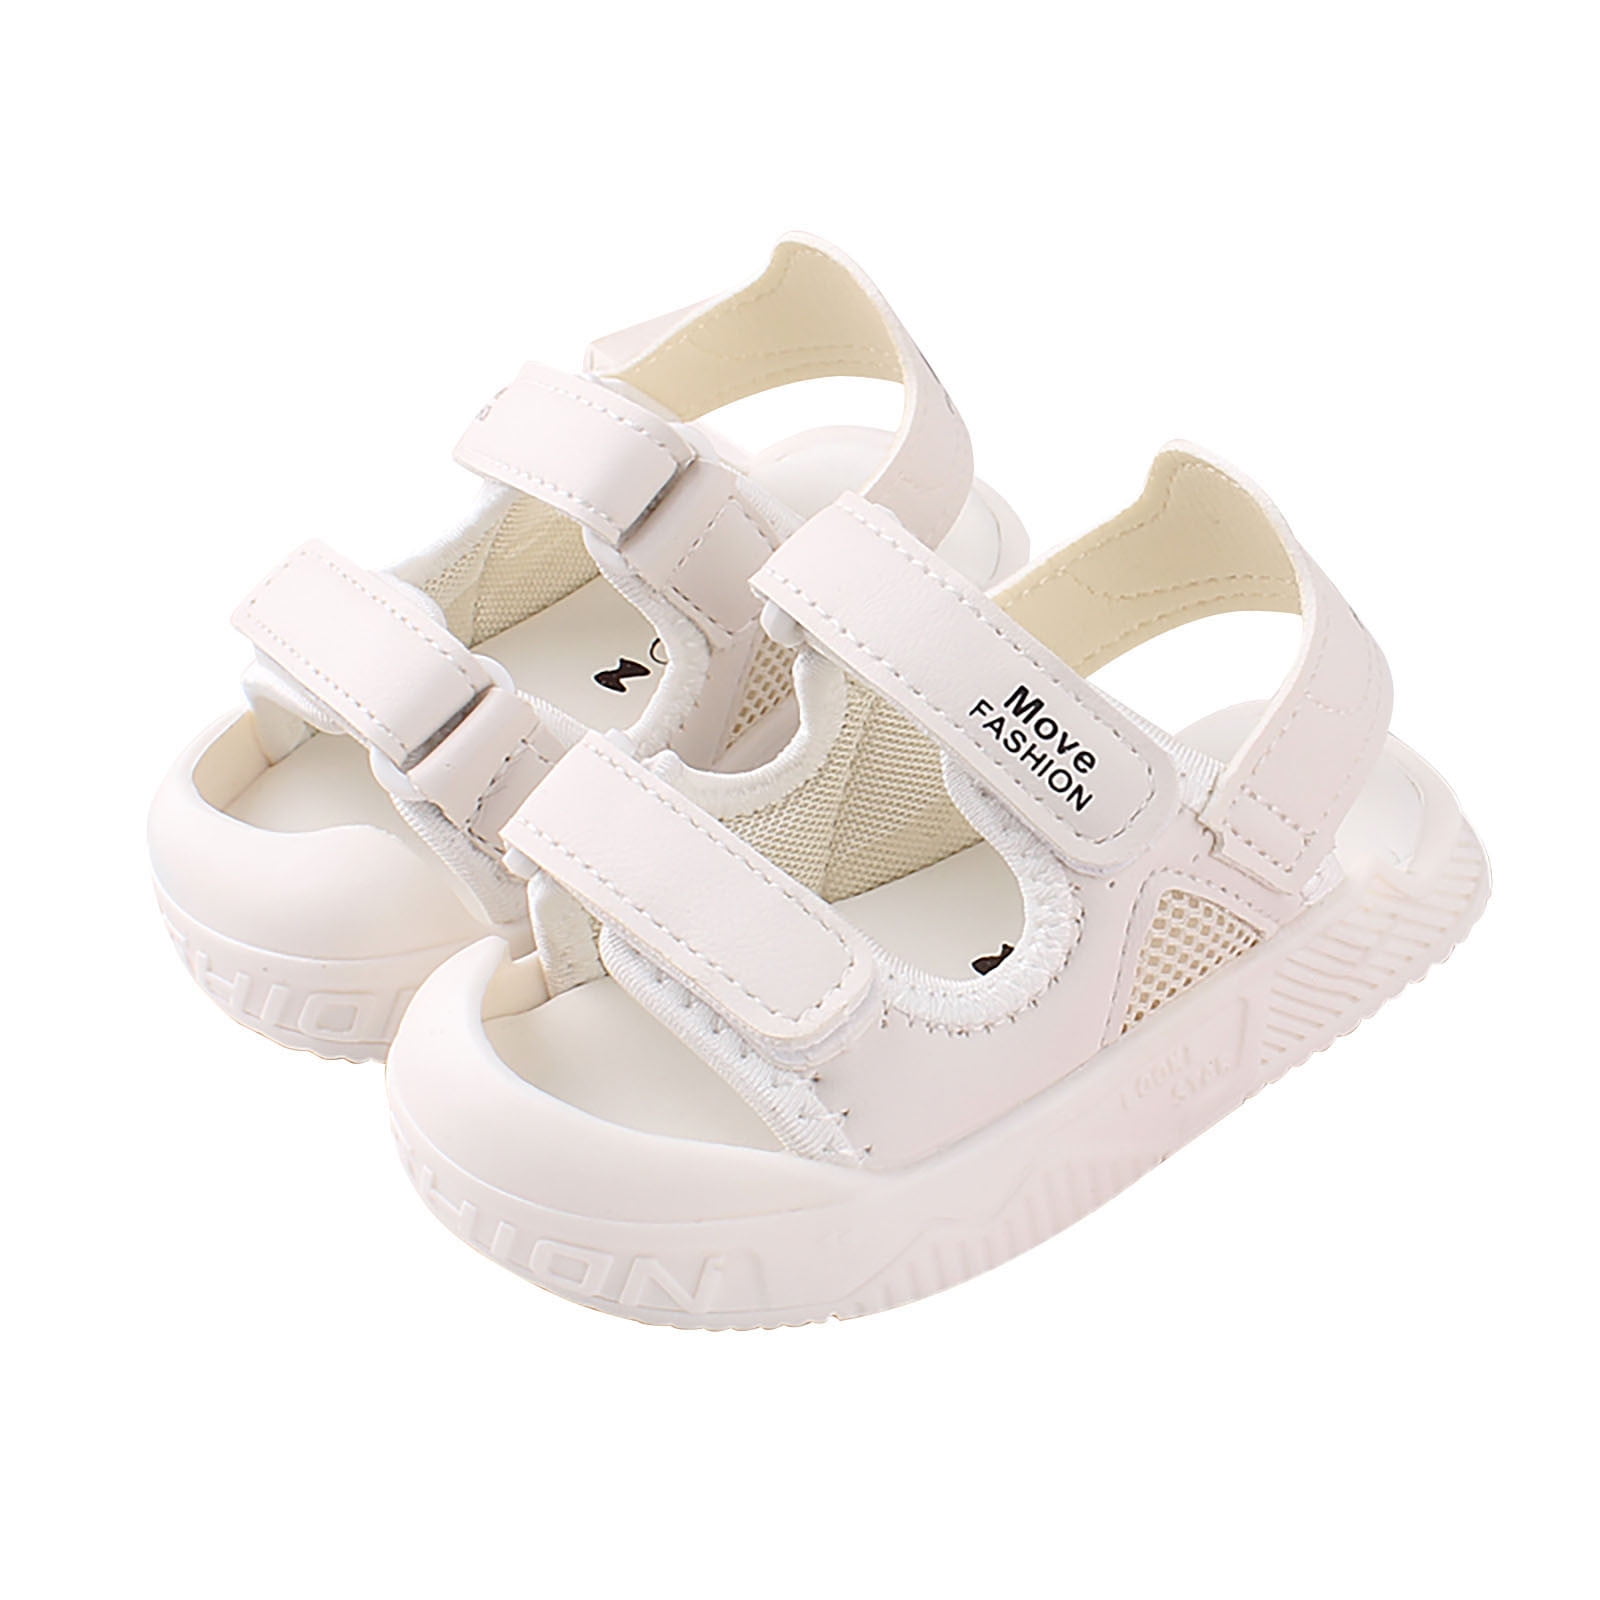 Lovskoo Unisex Baby First Walking Shoes 9 Months-2.5 Years Infant ...